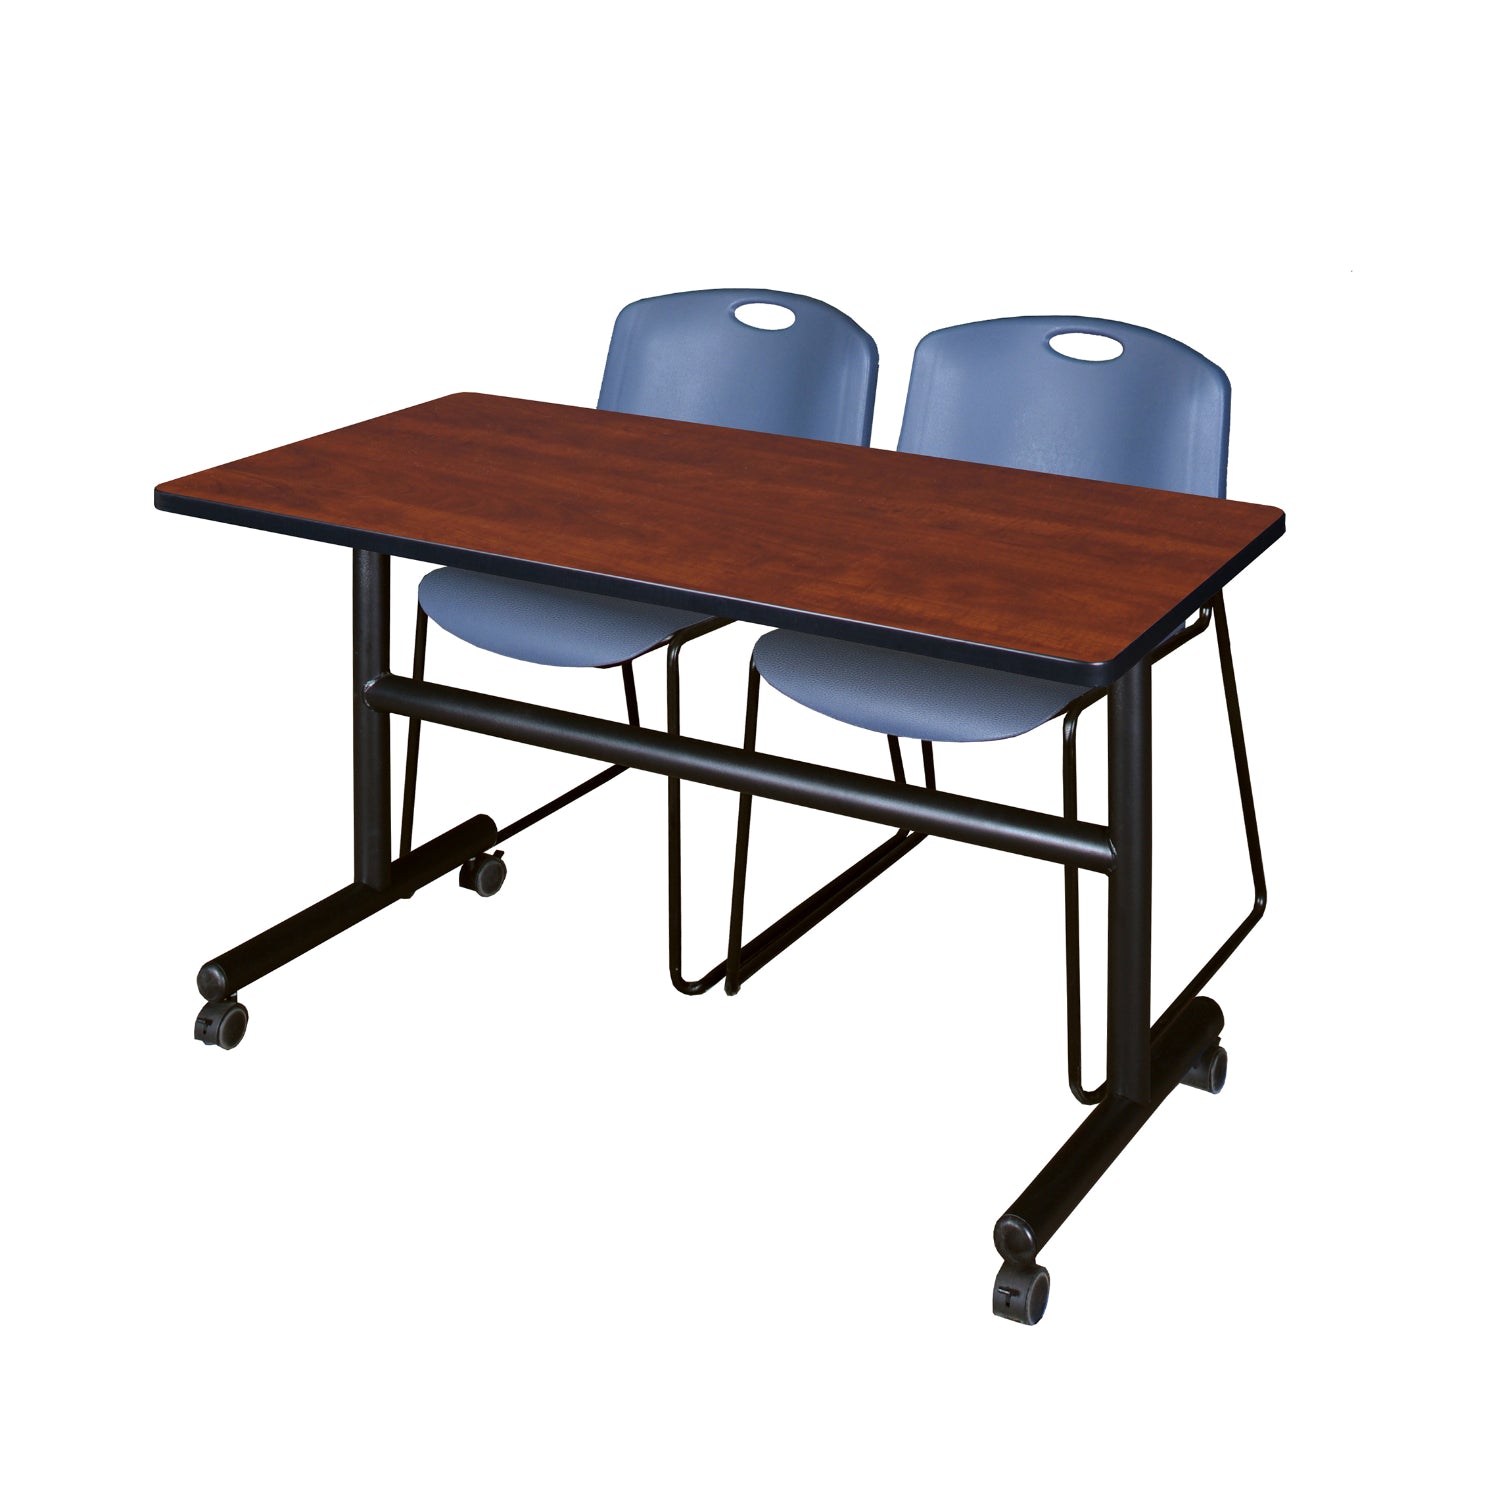 Kobe Flip Top Training Table and Chair Package, Kobe 48" x 30" Flip Top Mobile Nesting Table with 2 Zeng Stack Chairs